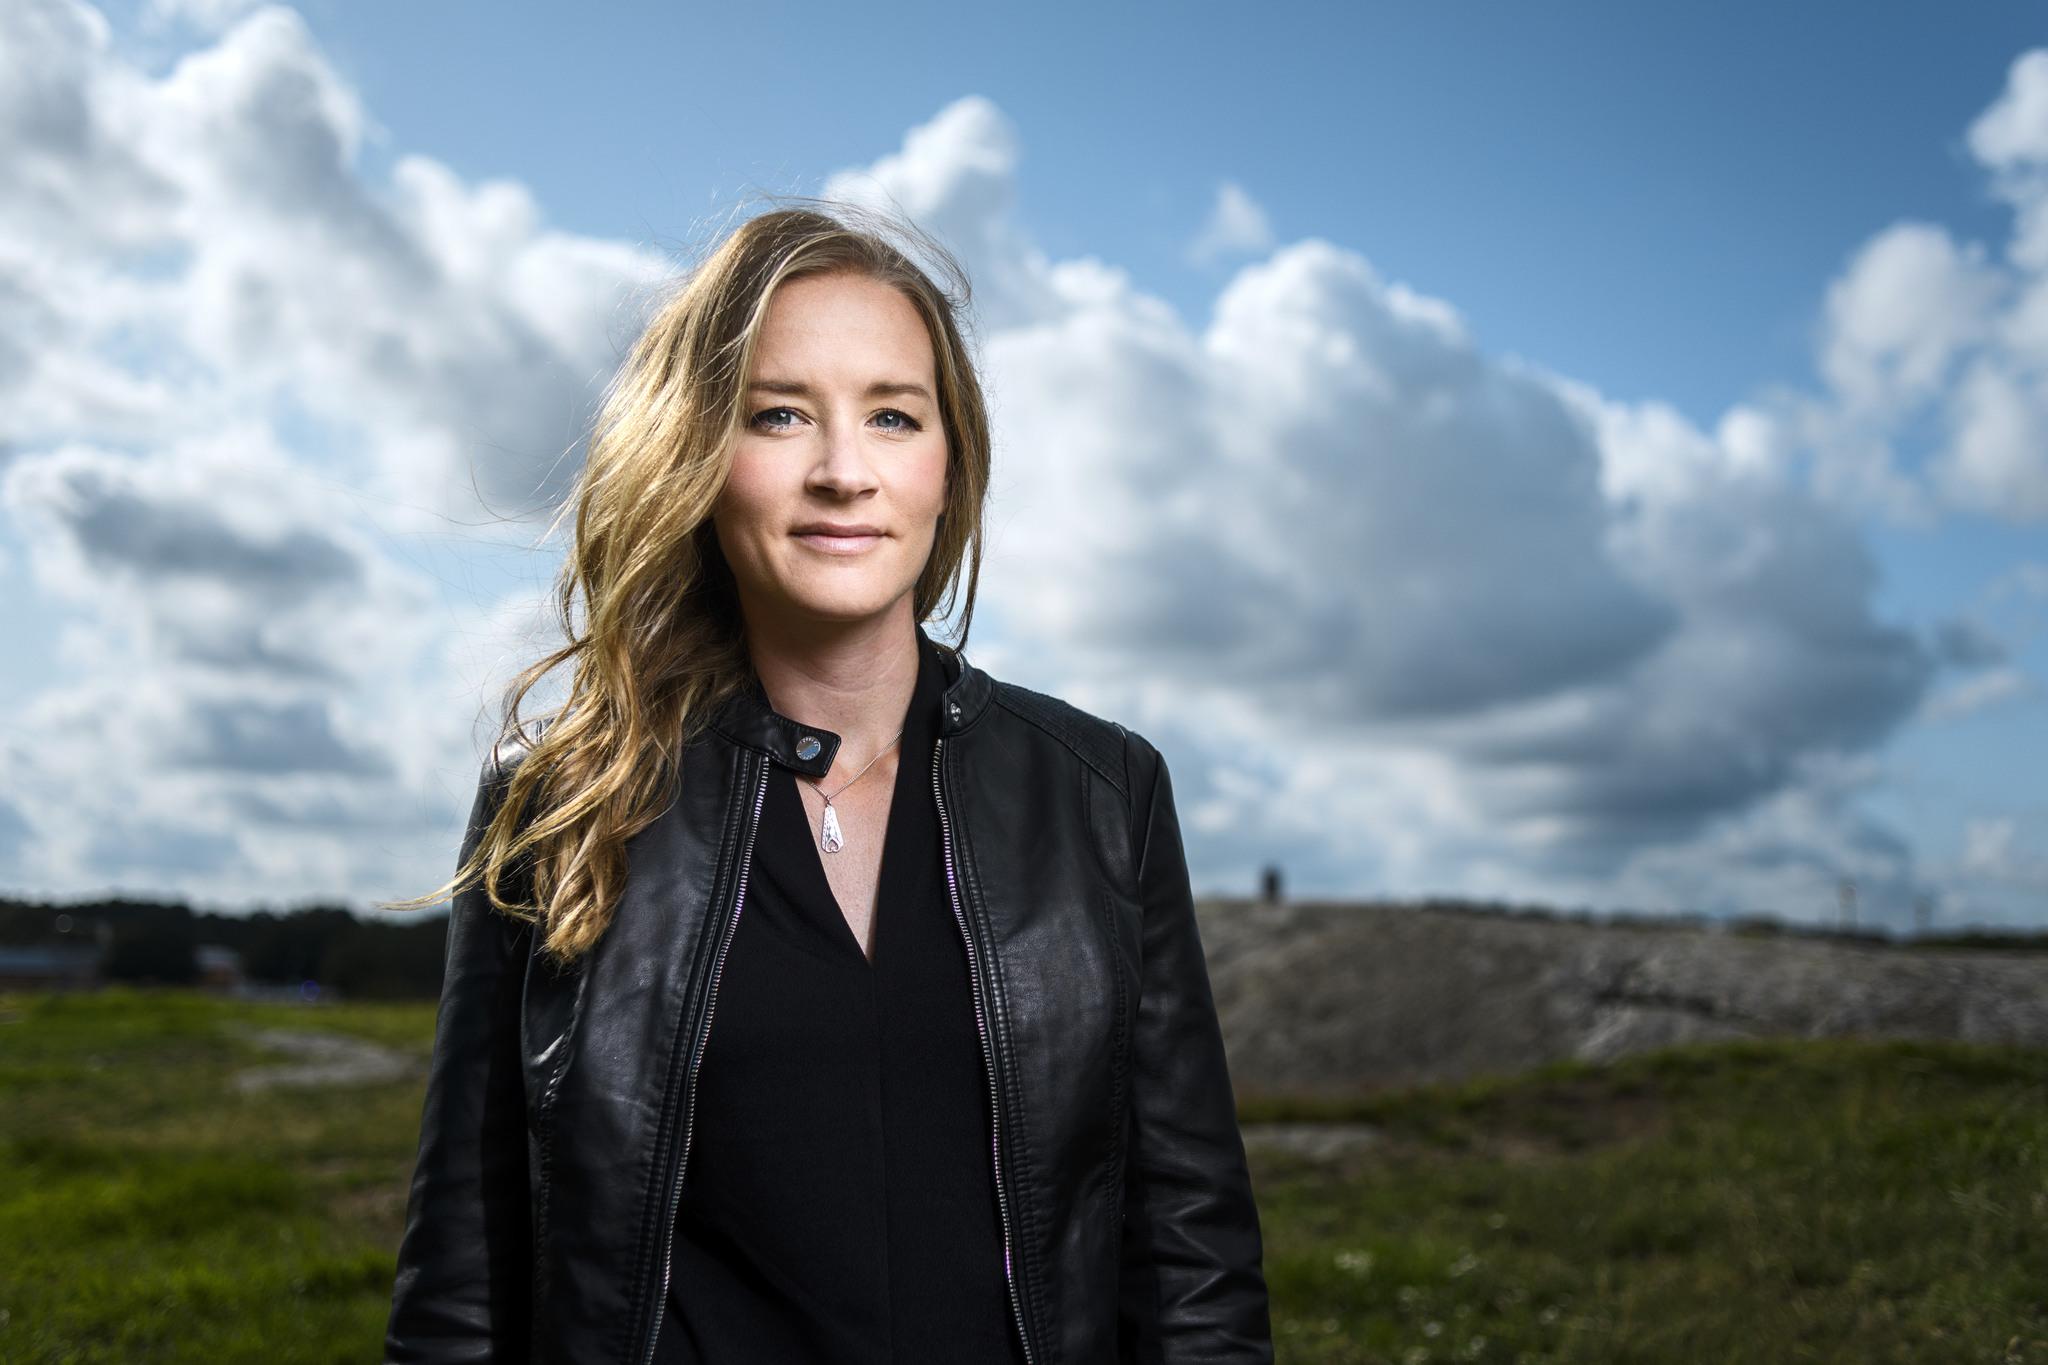 A portrait of Stina Jackson, a woman with long blond hair, wearing a black leather jacket. An open landscape and blue skies in the background.